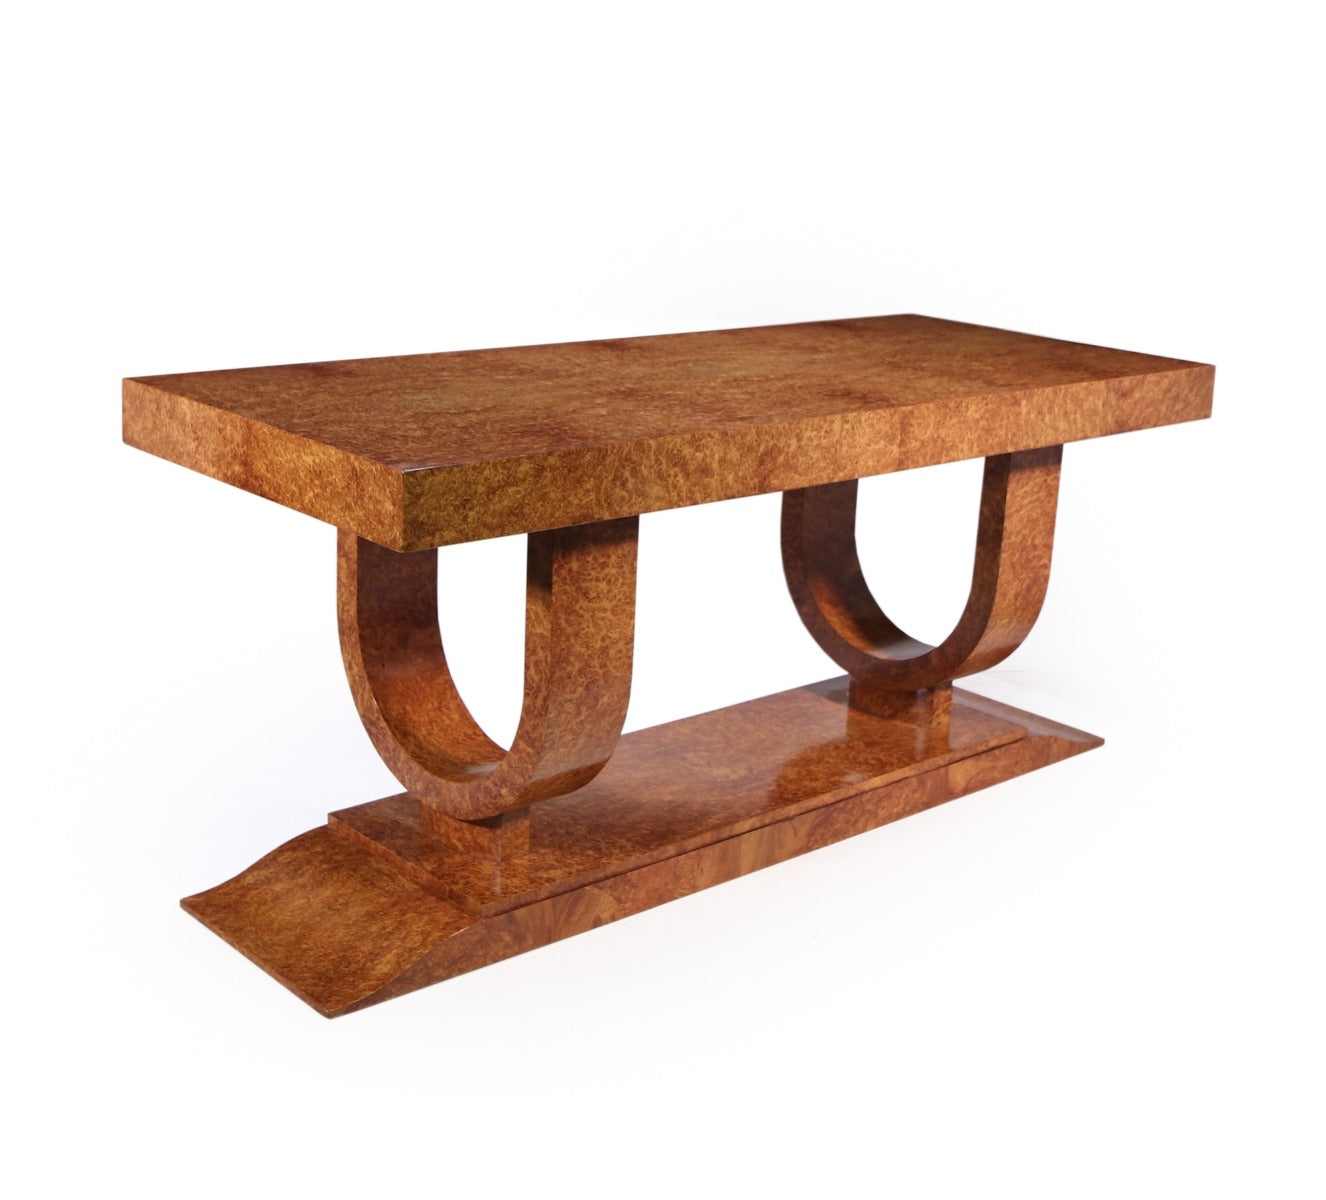 Art Deco Table in Amboyna By Jean Faur�� – The Furniture R